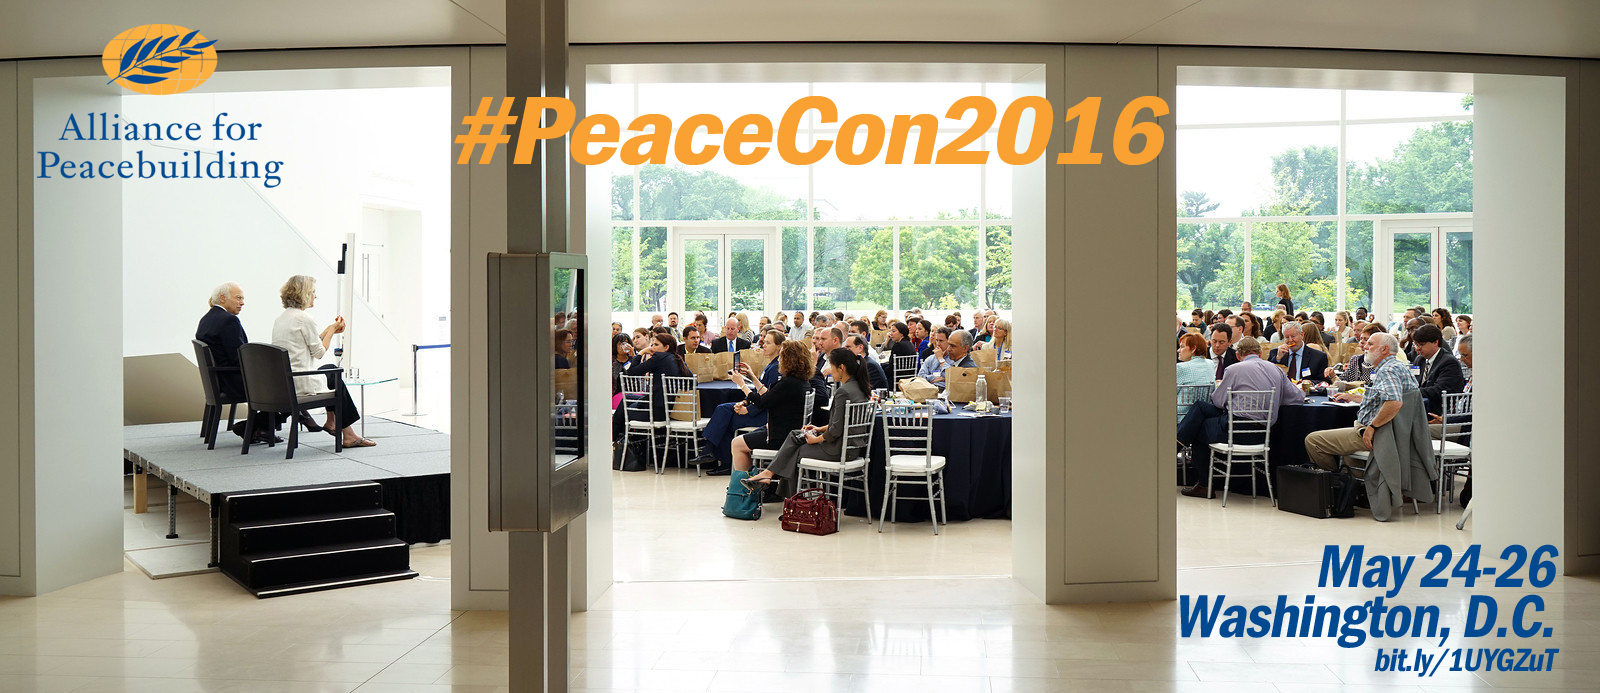 Where can you learn about the future of peace building?